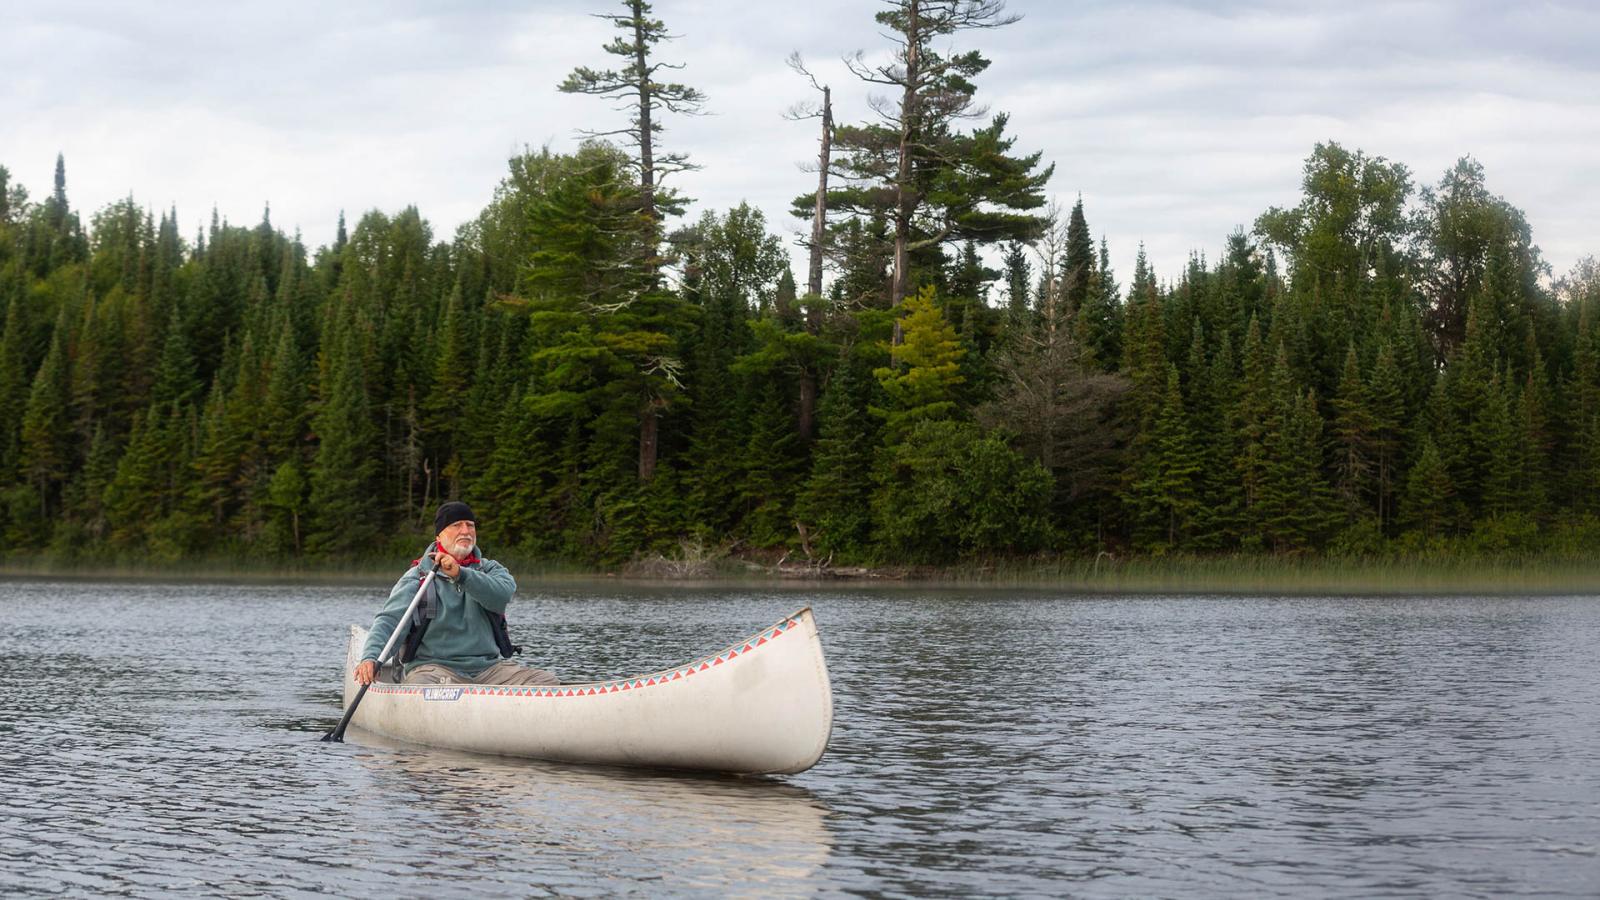 Man paddling a canoe in a lake surrounded by evergreen forest